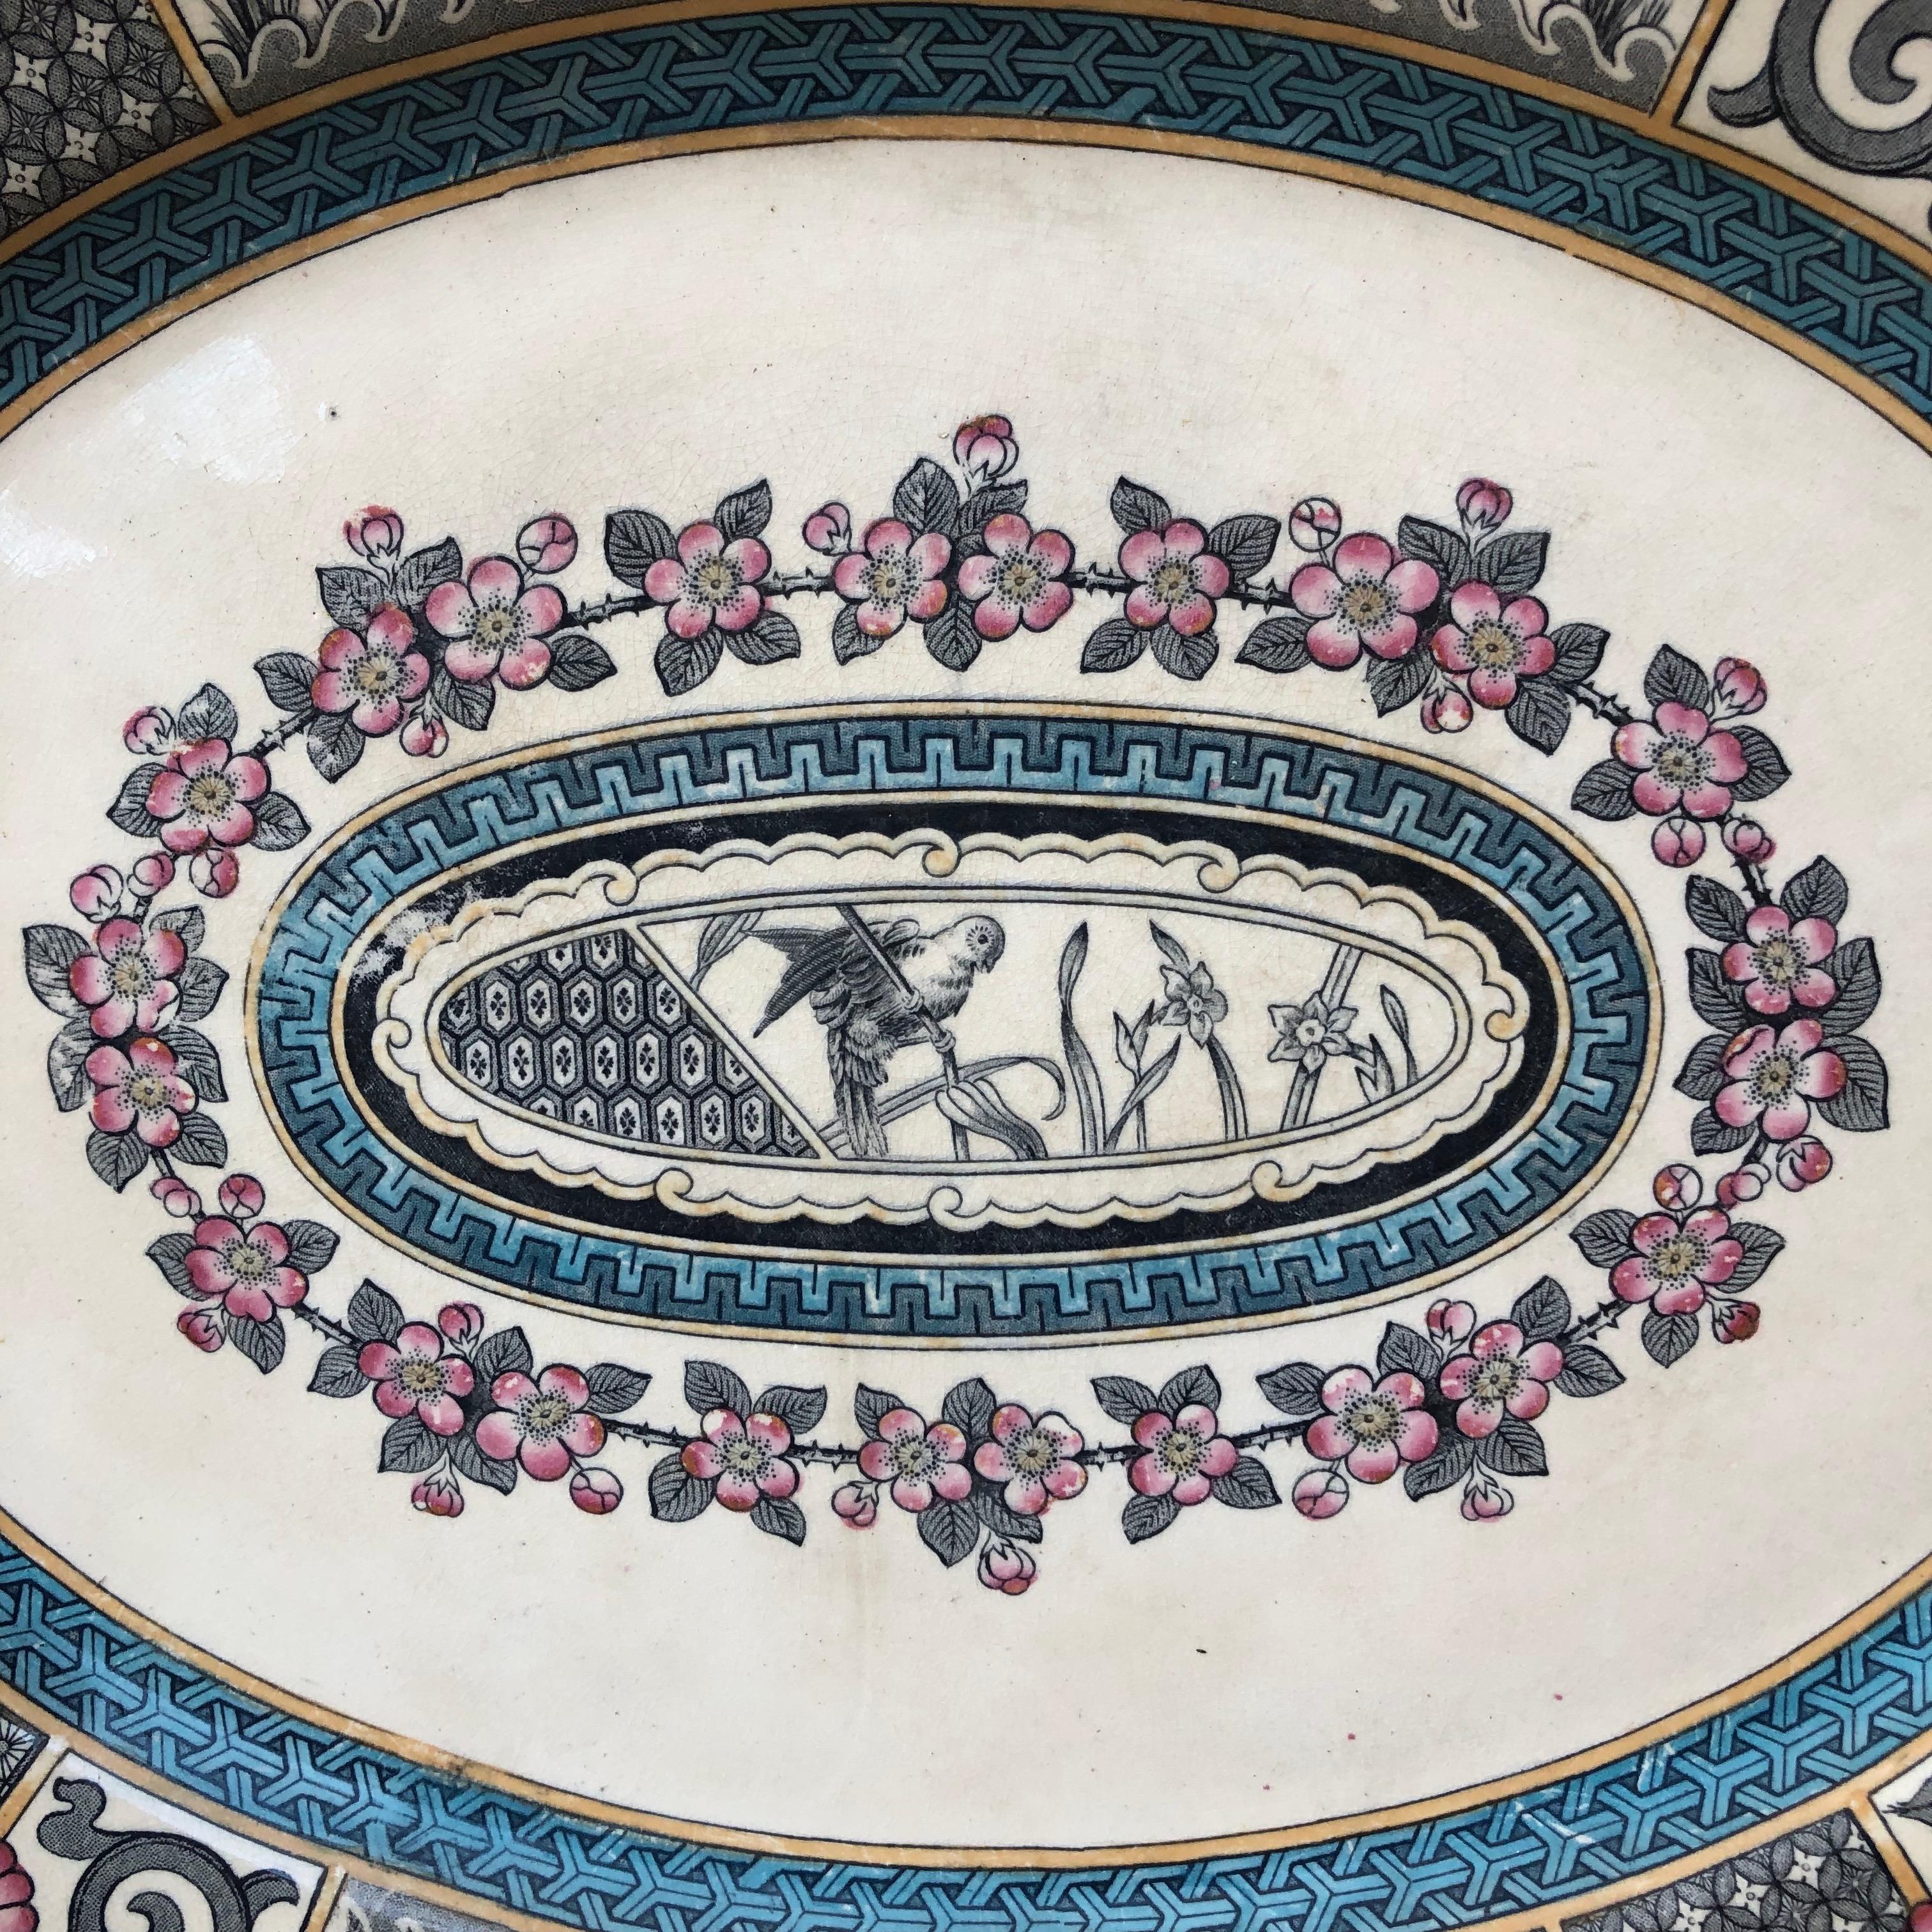 Oversize 19th century English Chinoiserie ironstone platter bates gildea & walker.
Kioto Pattern.
Earthenware and porcelain manufacturer at the Dale Hall Works, Longport, Burslem, Stoke-on-Trent.
In 1878 James Gildea joined the partnership of